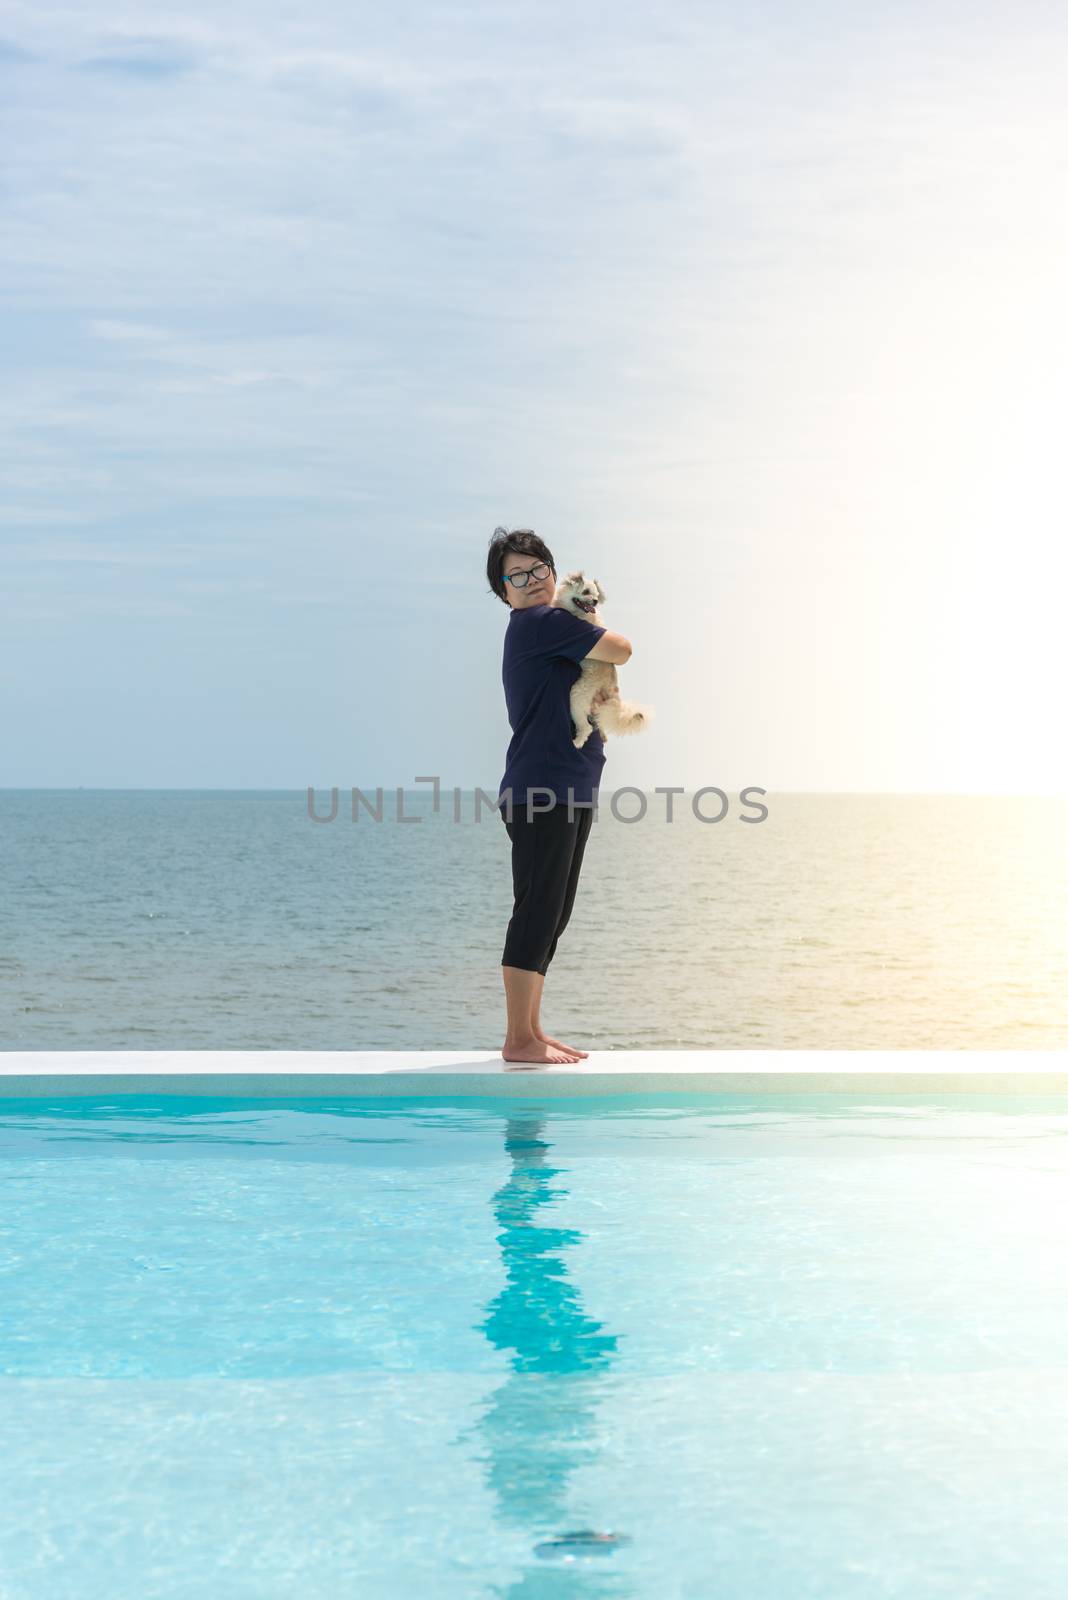 Woman and dog at outdoor swimming seaside the sea by PongMoji